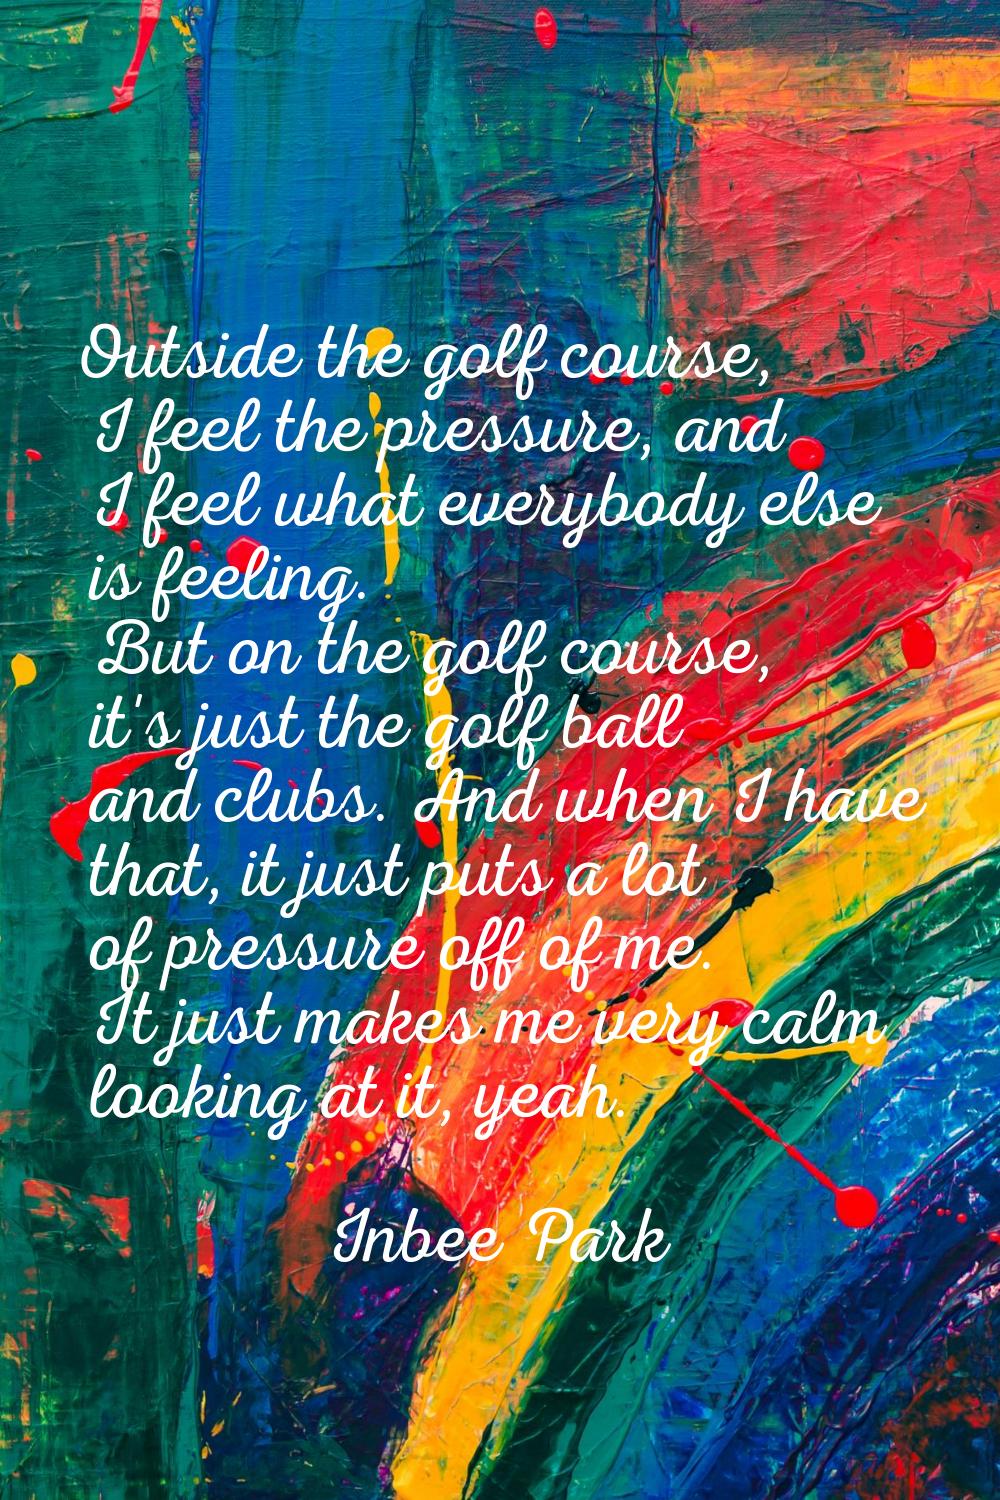 Outside the golf course, I feel the pressure, and I feel what everybody else is feeling. But on the